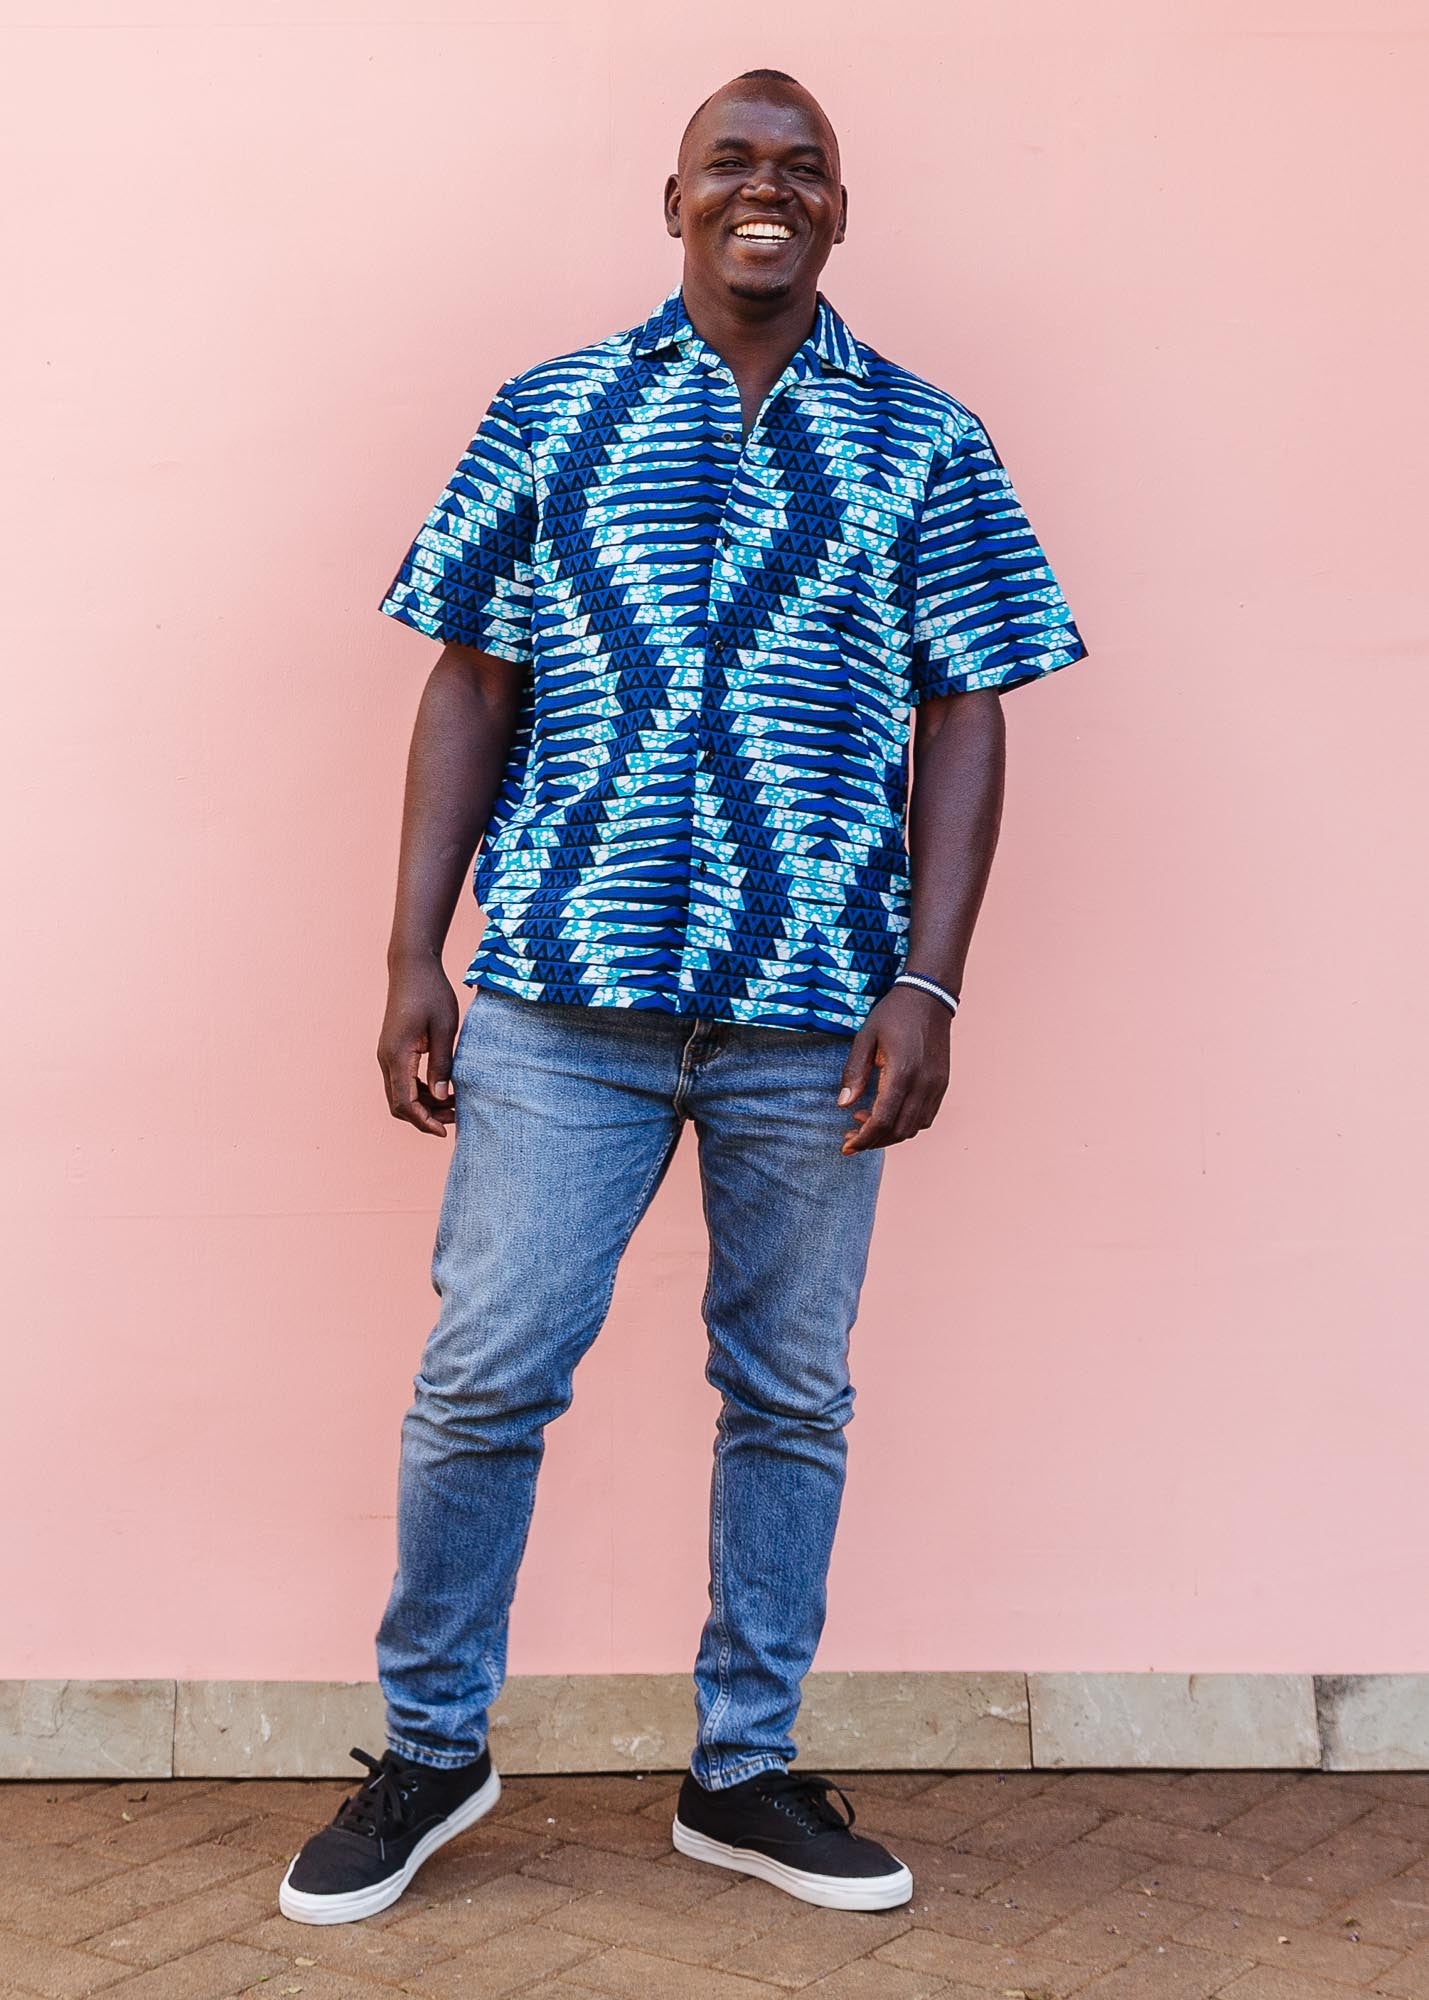 The model is wearing blue, sky blue and white colored men&#39;s shirt